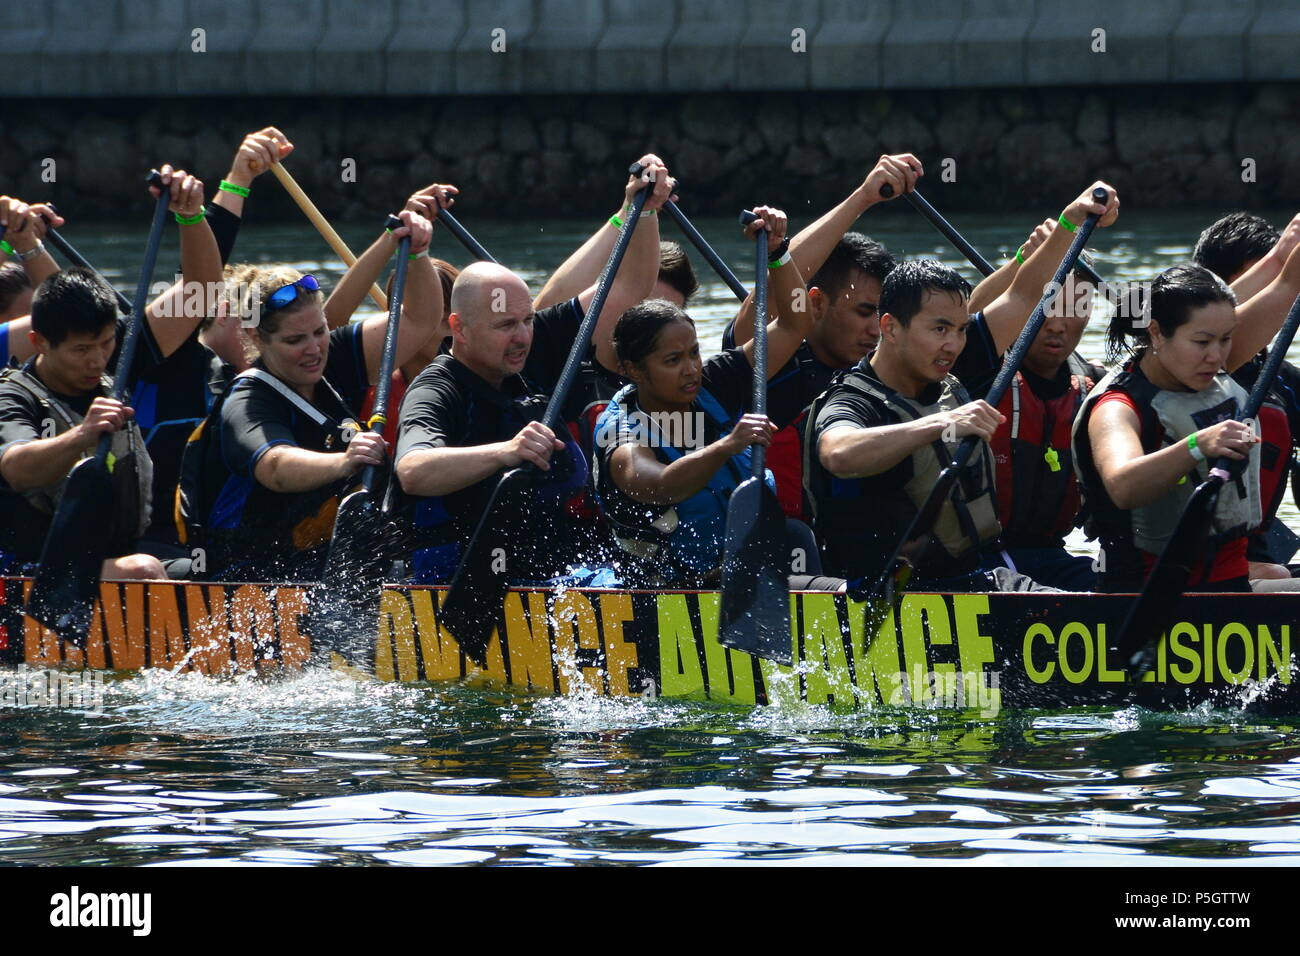 Dragon boat festival rowers, rowing to the finish line. Stock Photo